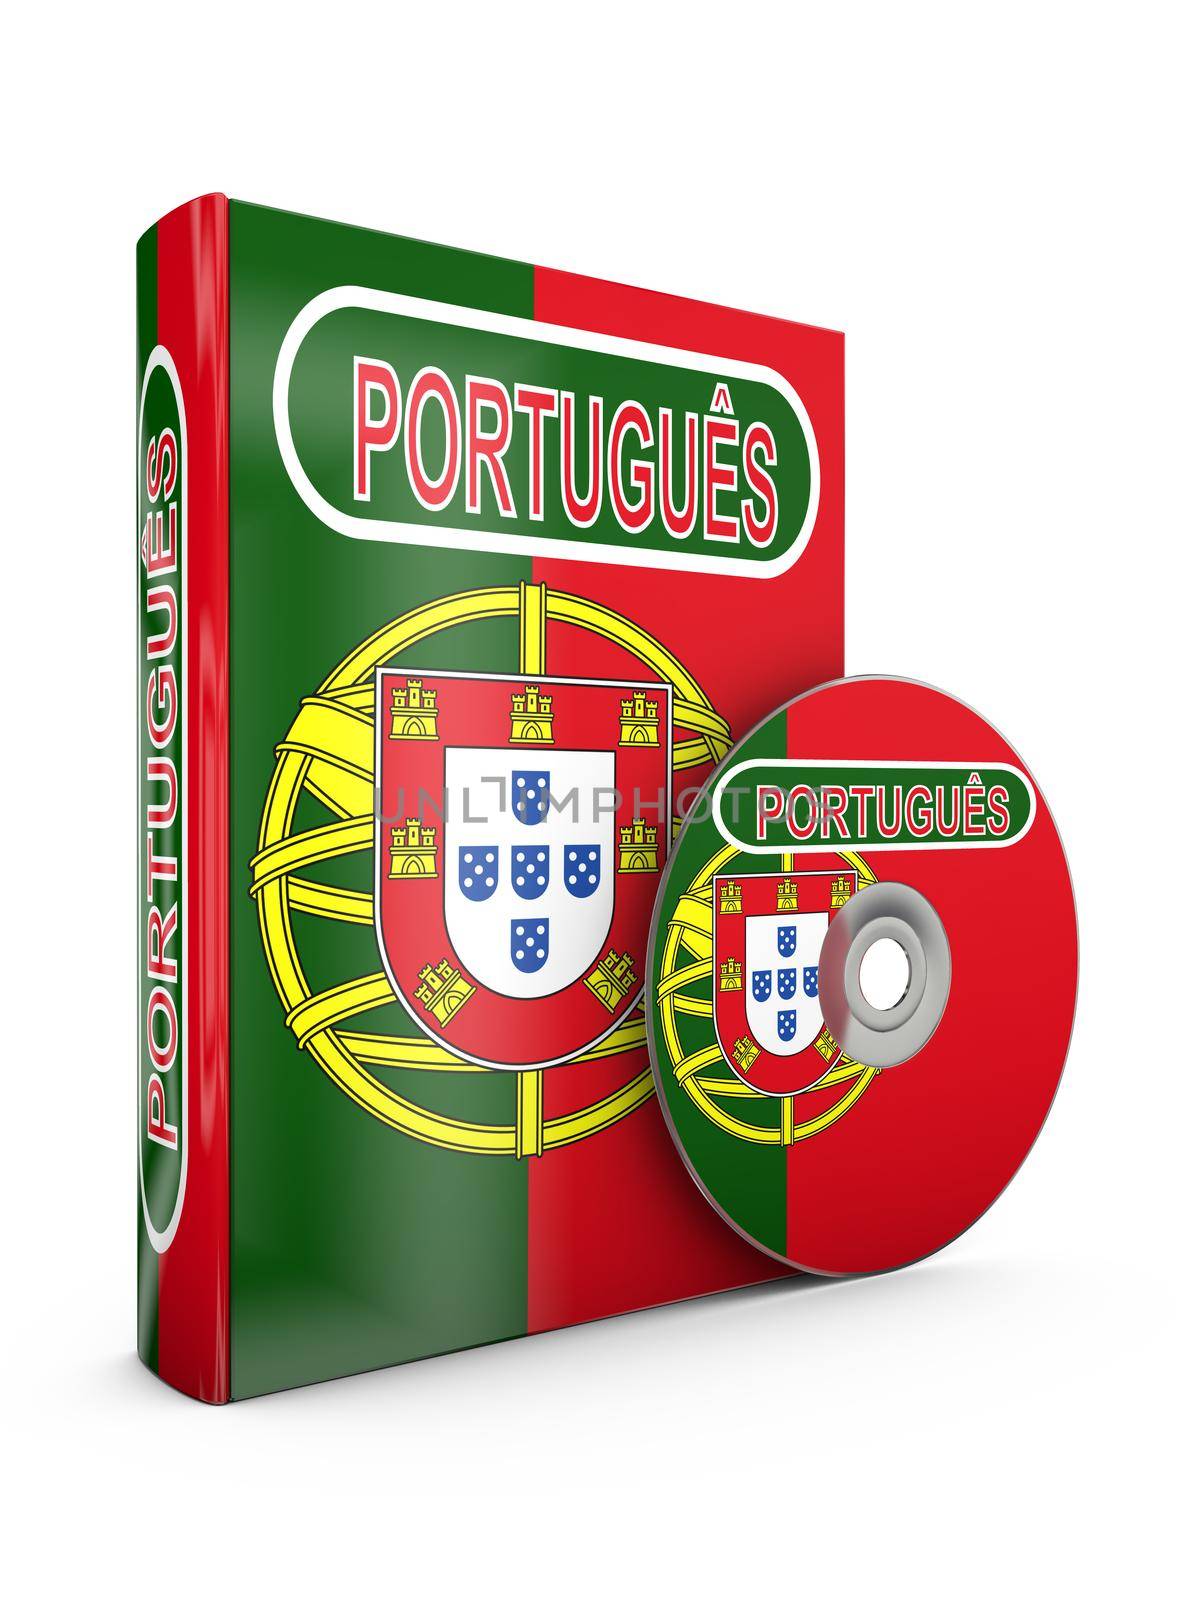 Portuguese by rommma